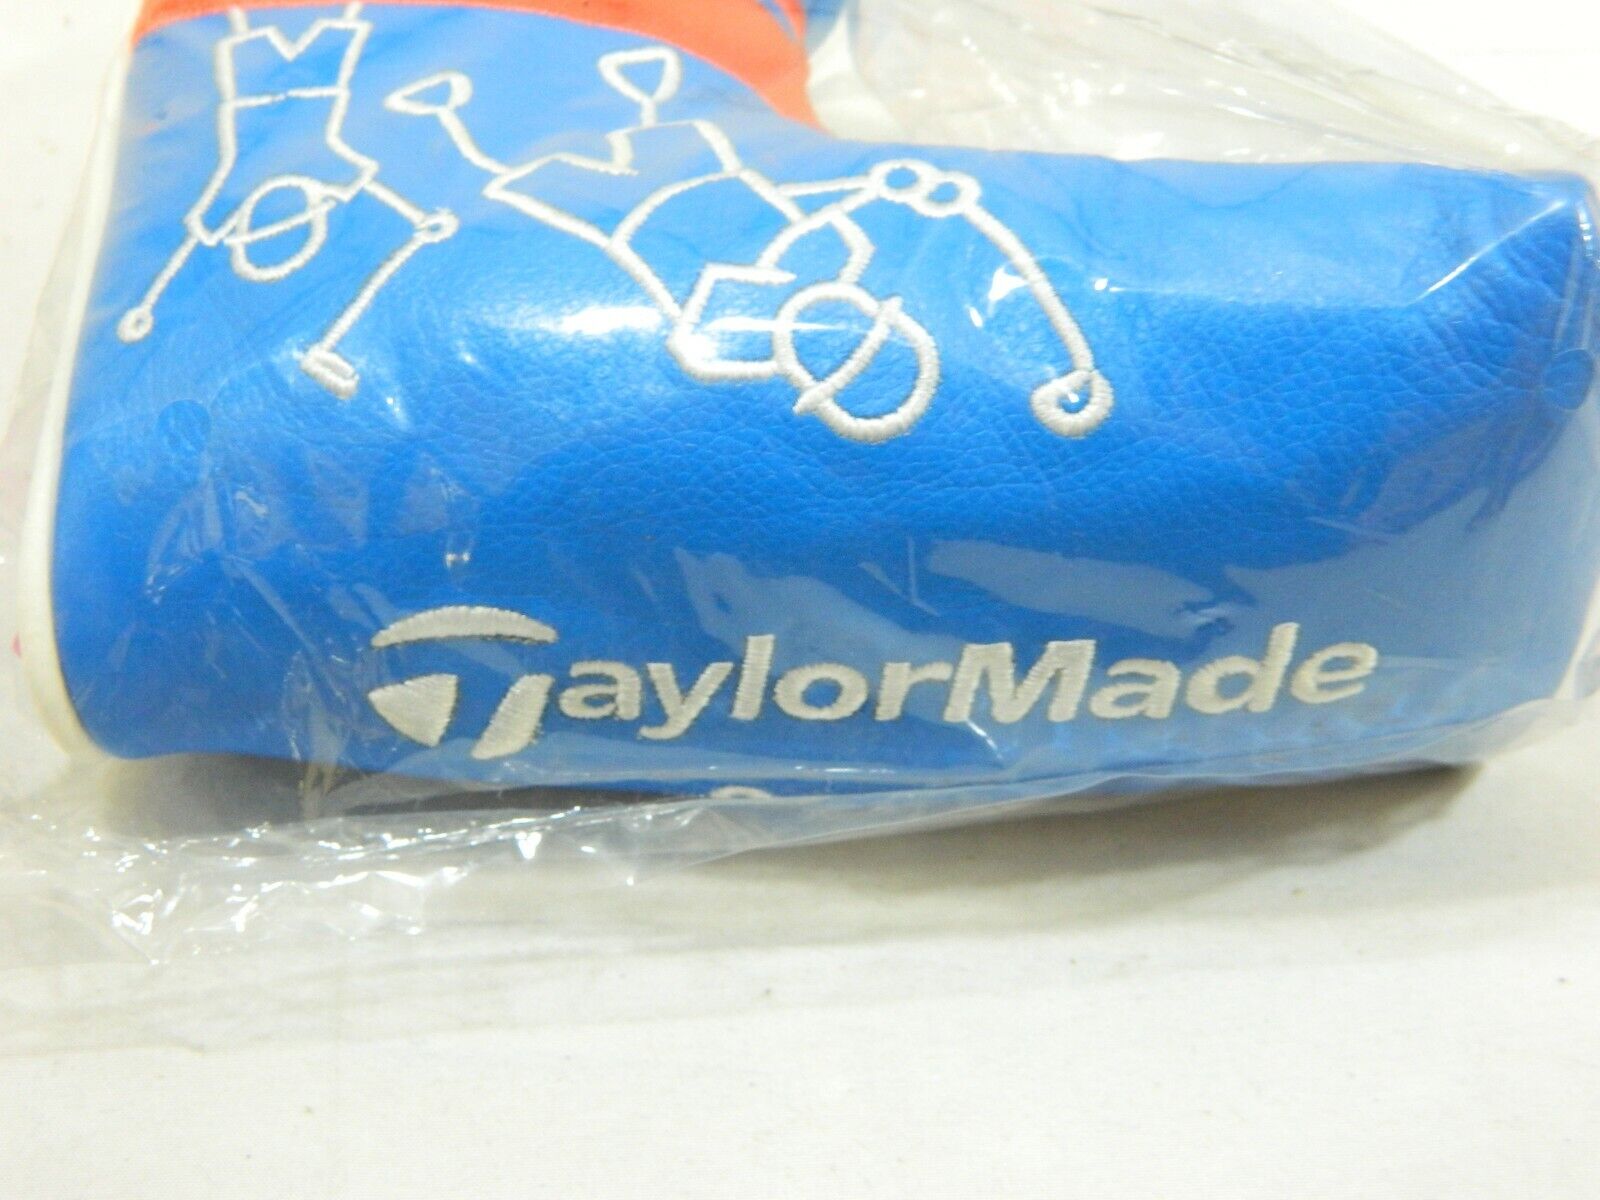 New Taylormade Limited Edition PGA Championship Blade Putter Headcover